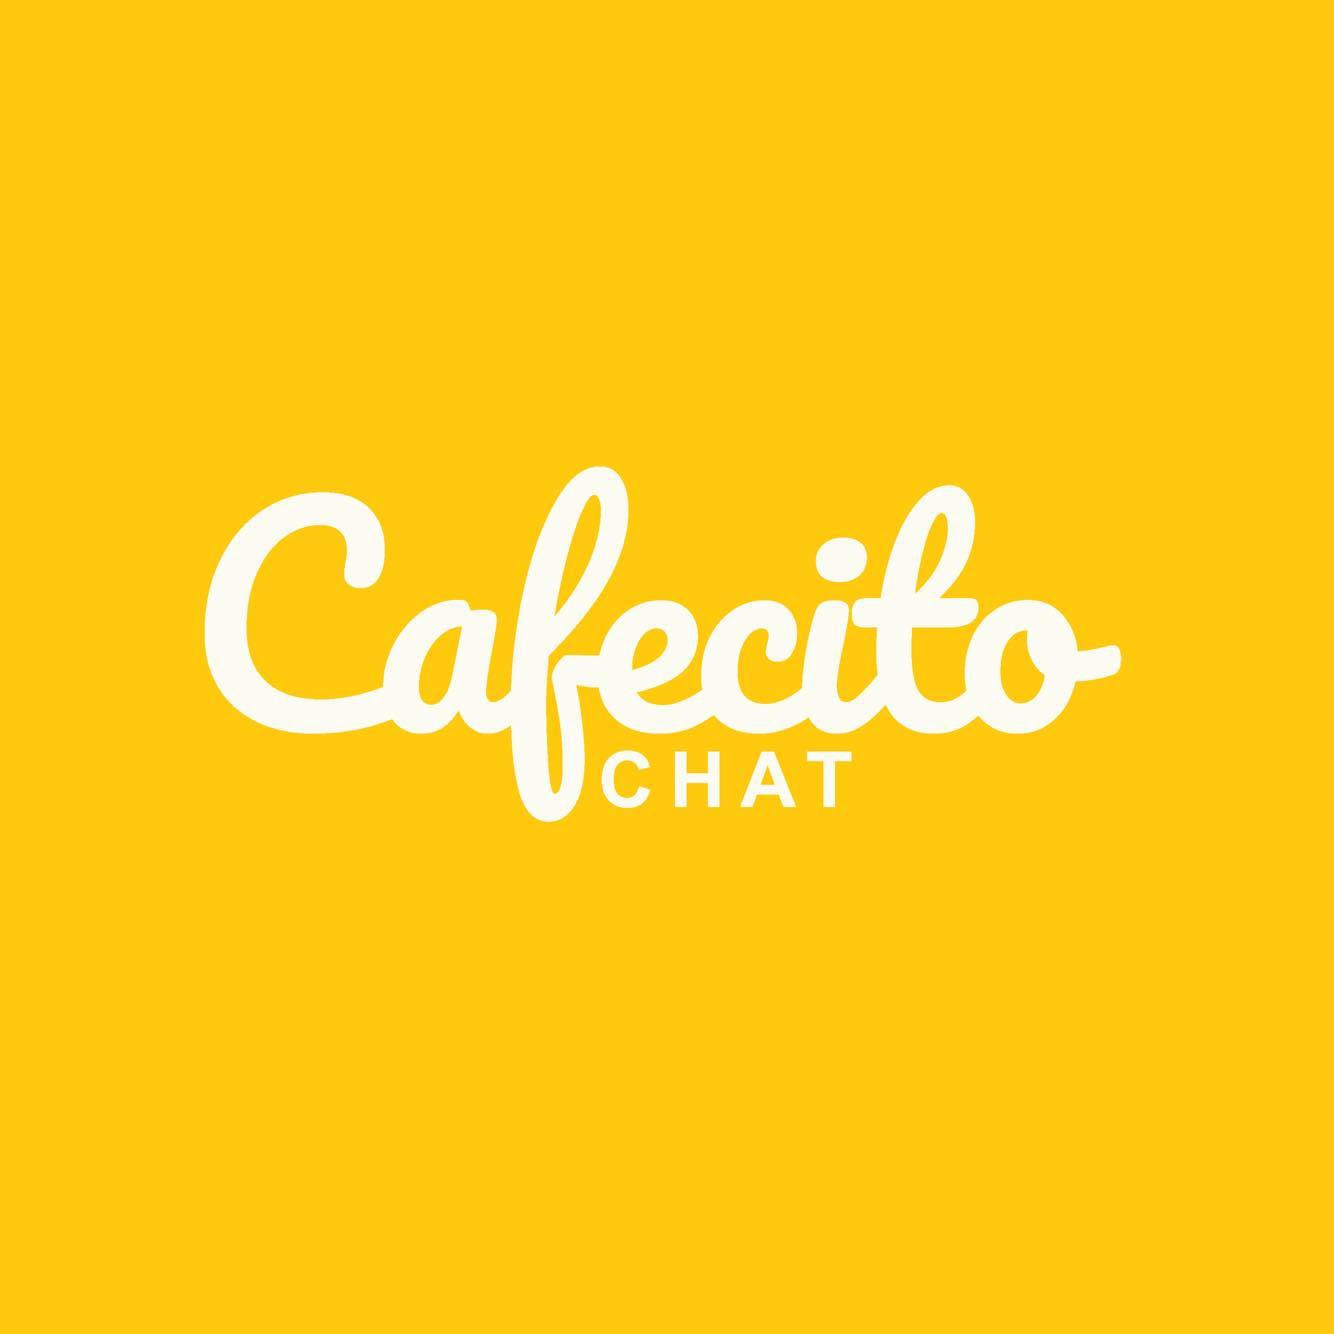 Cafecito Chat